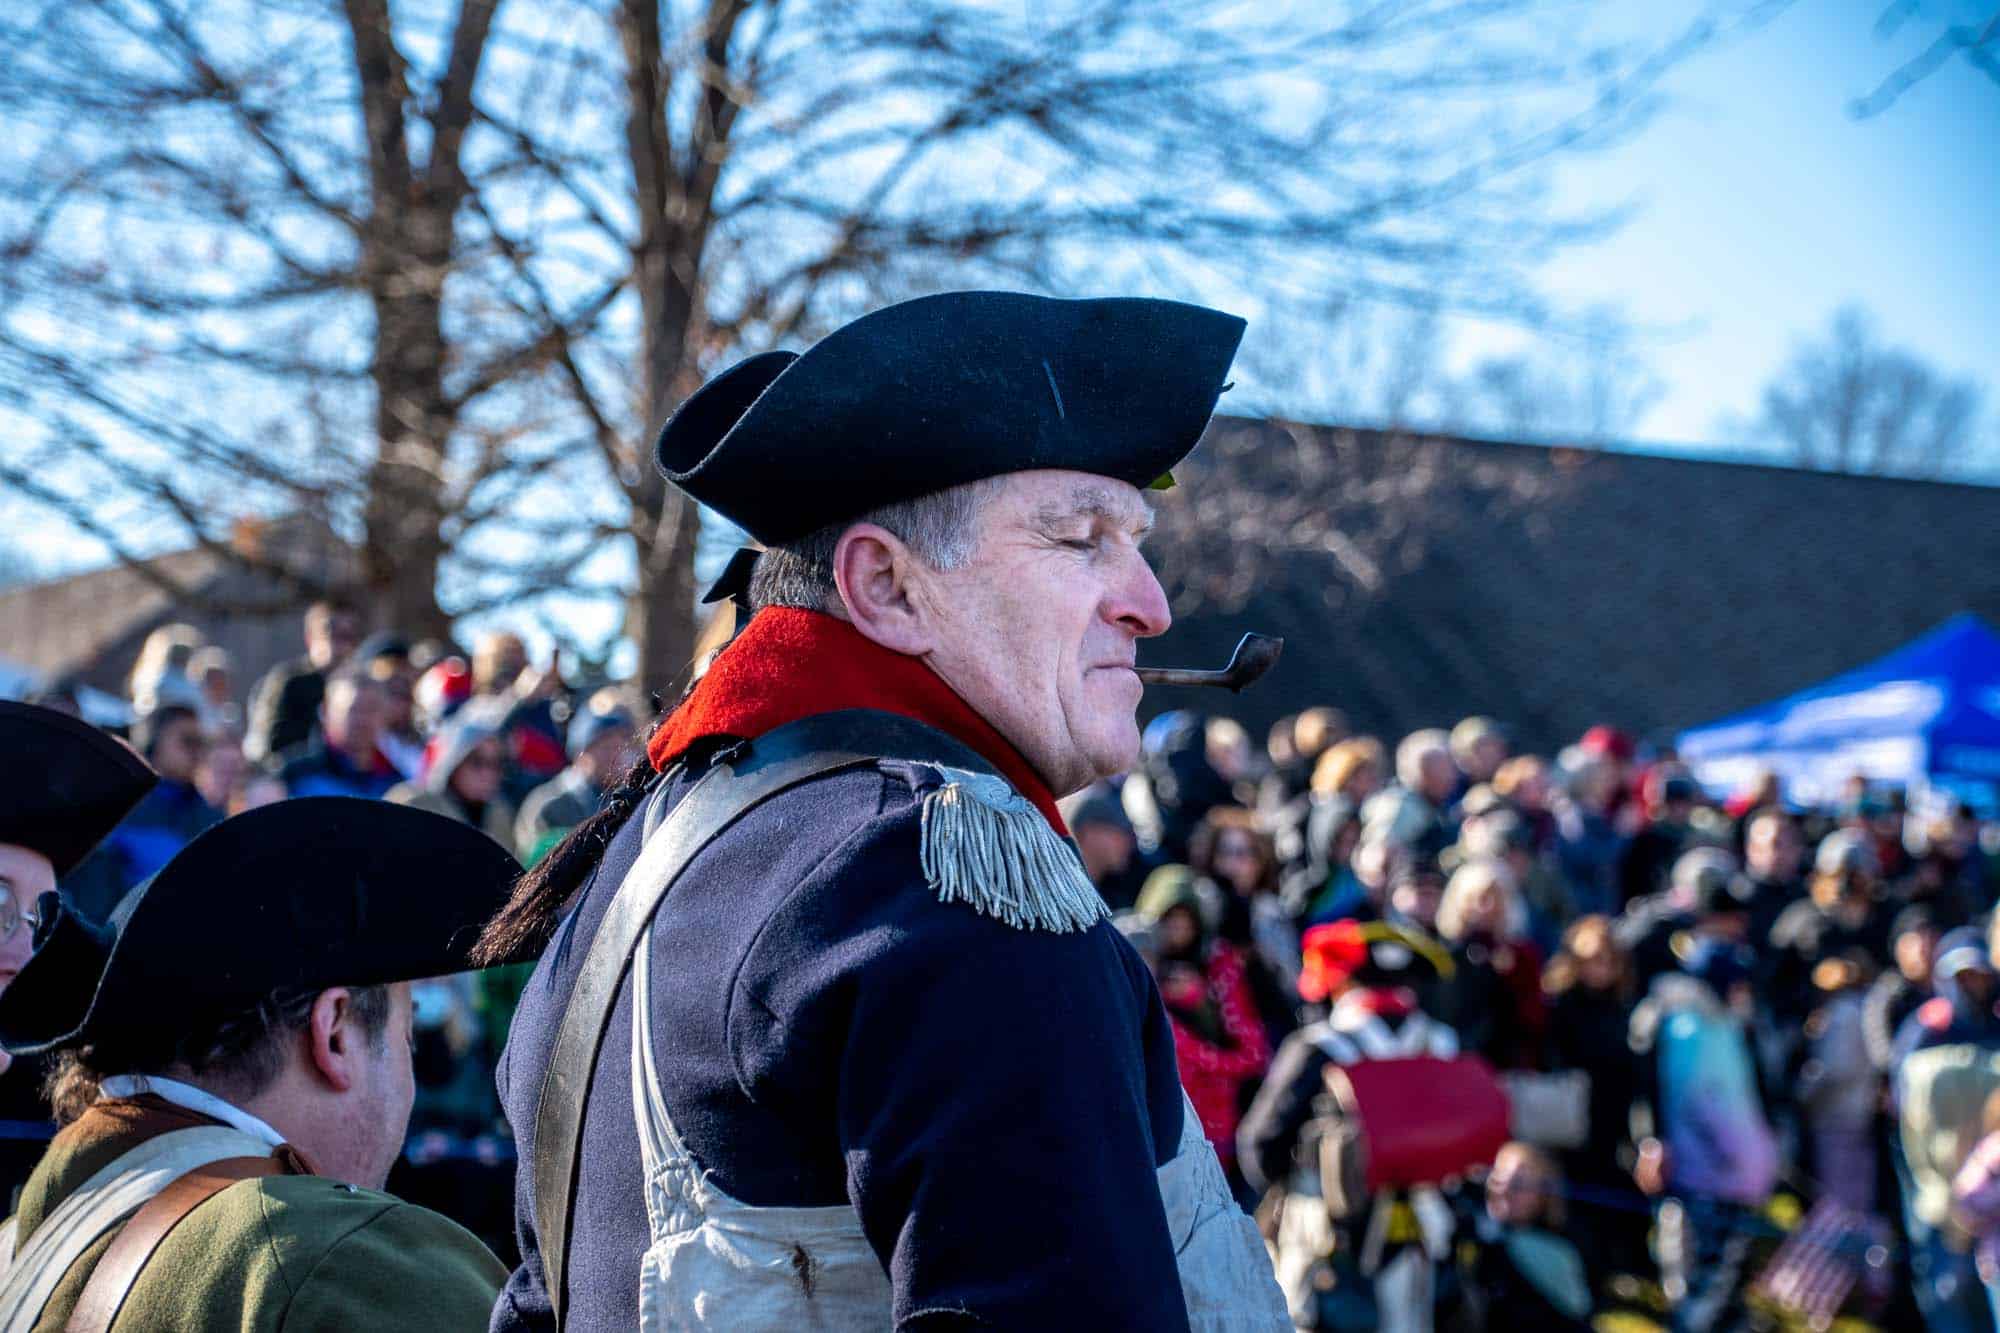 Reenactor smoking a pipe pauses in front of a crowd.